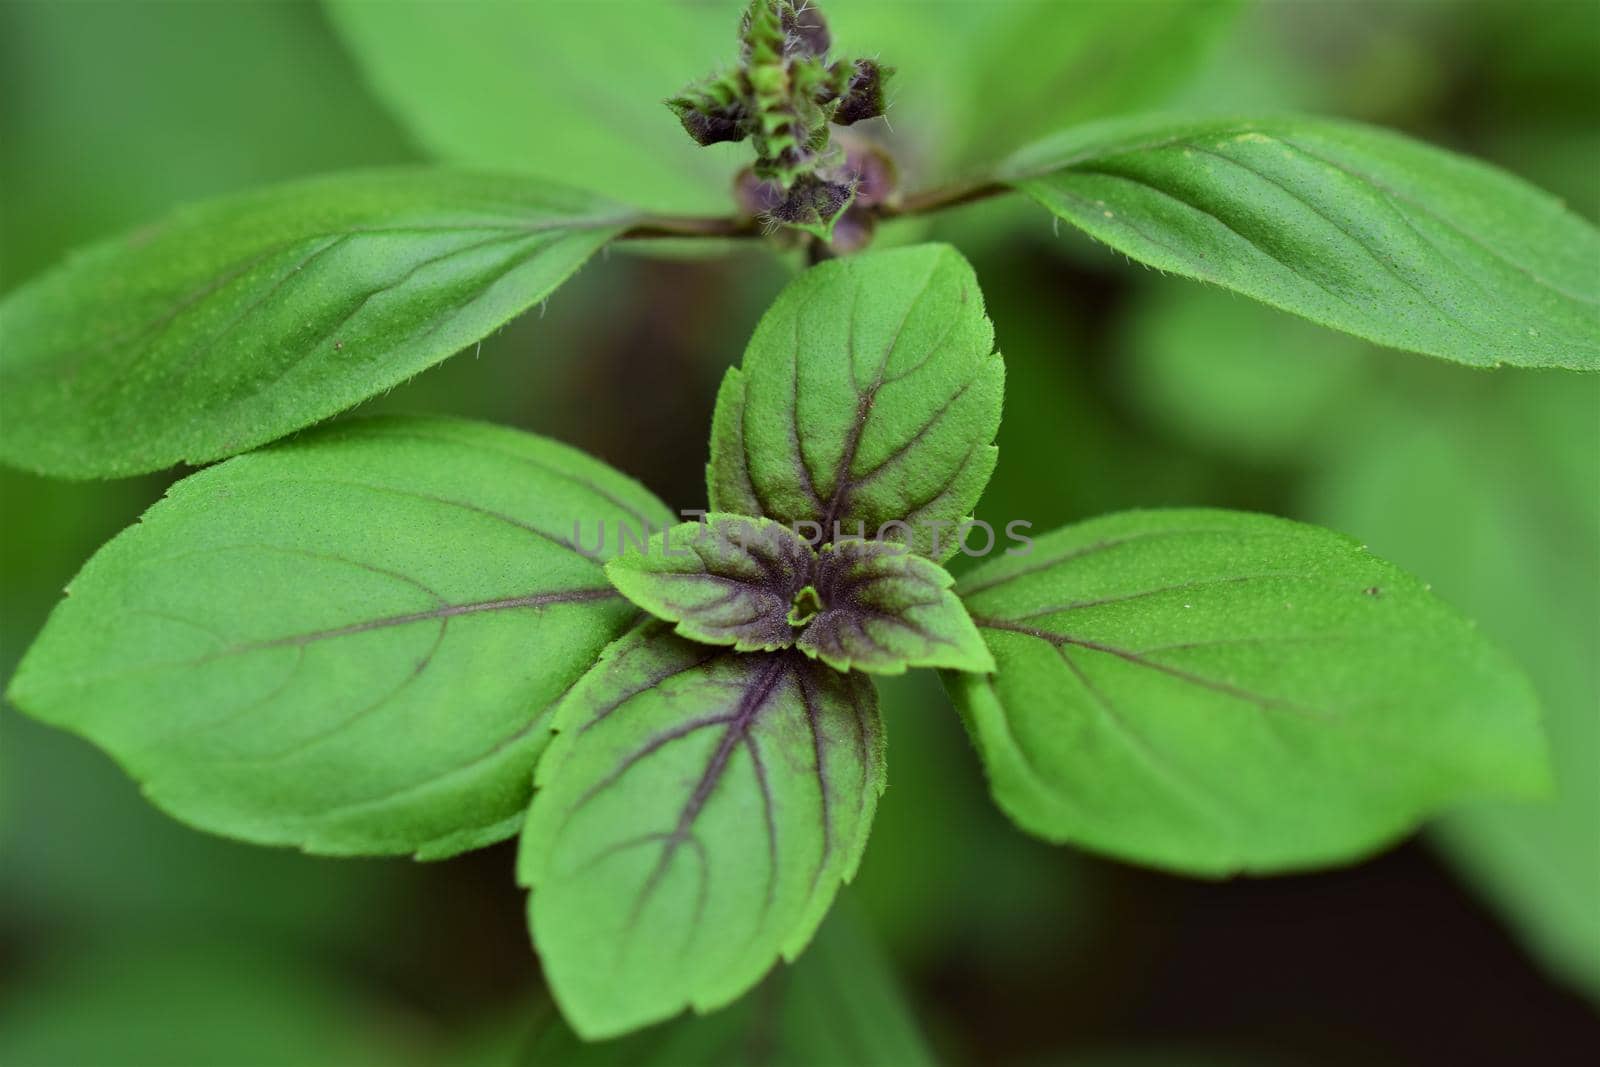 Close-up of shrub basil against a blurred background